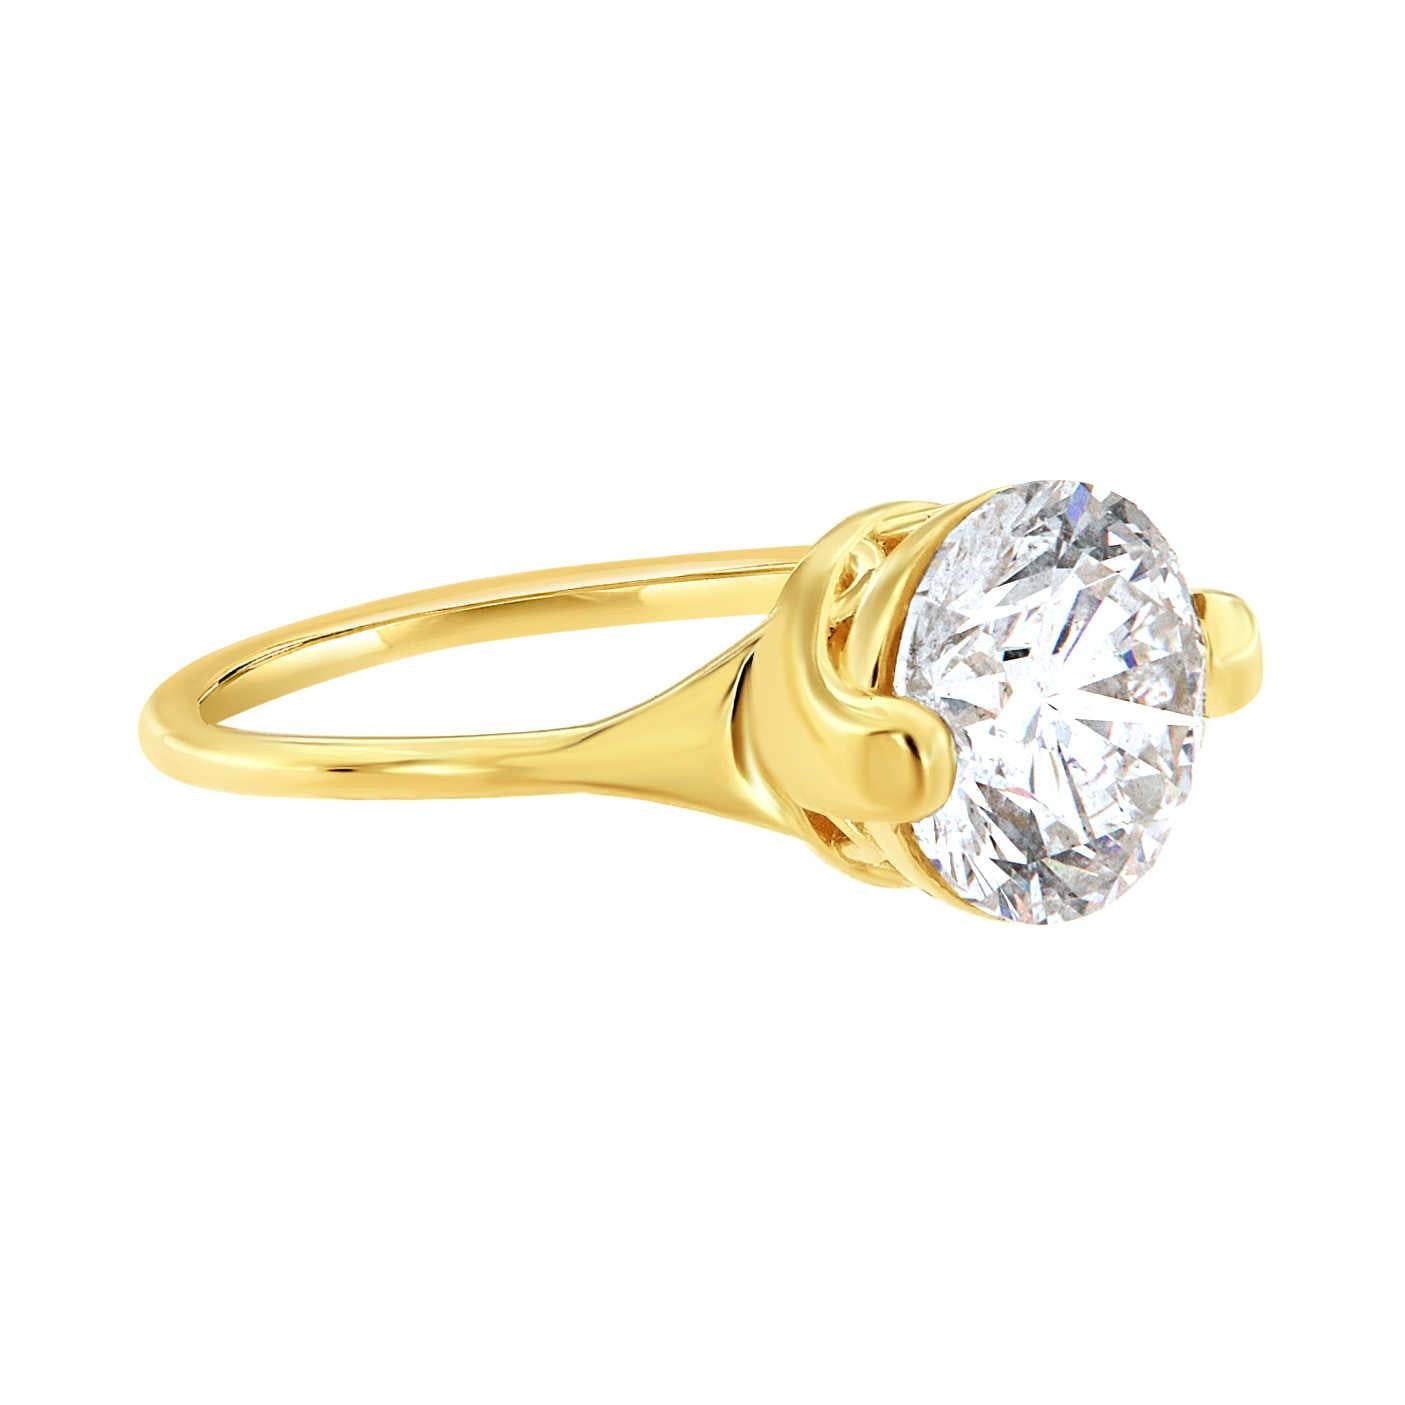 Round Cut EGL USA Certified 3.01 Carat Round Diamond 14K Yellow Gold Solitaire Ring